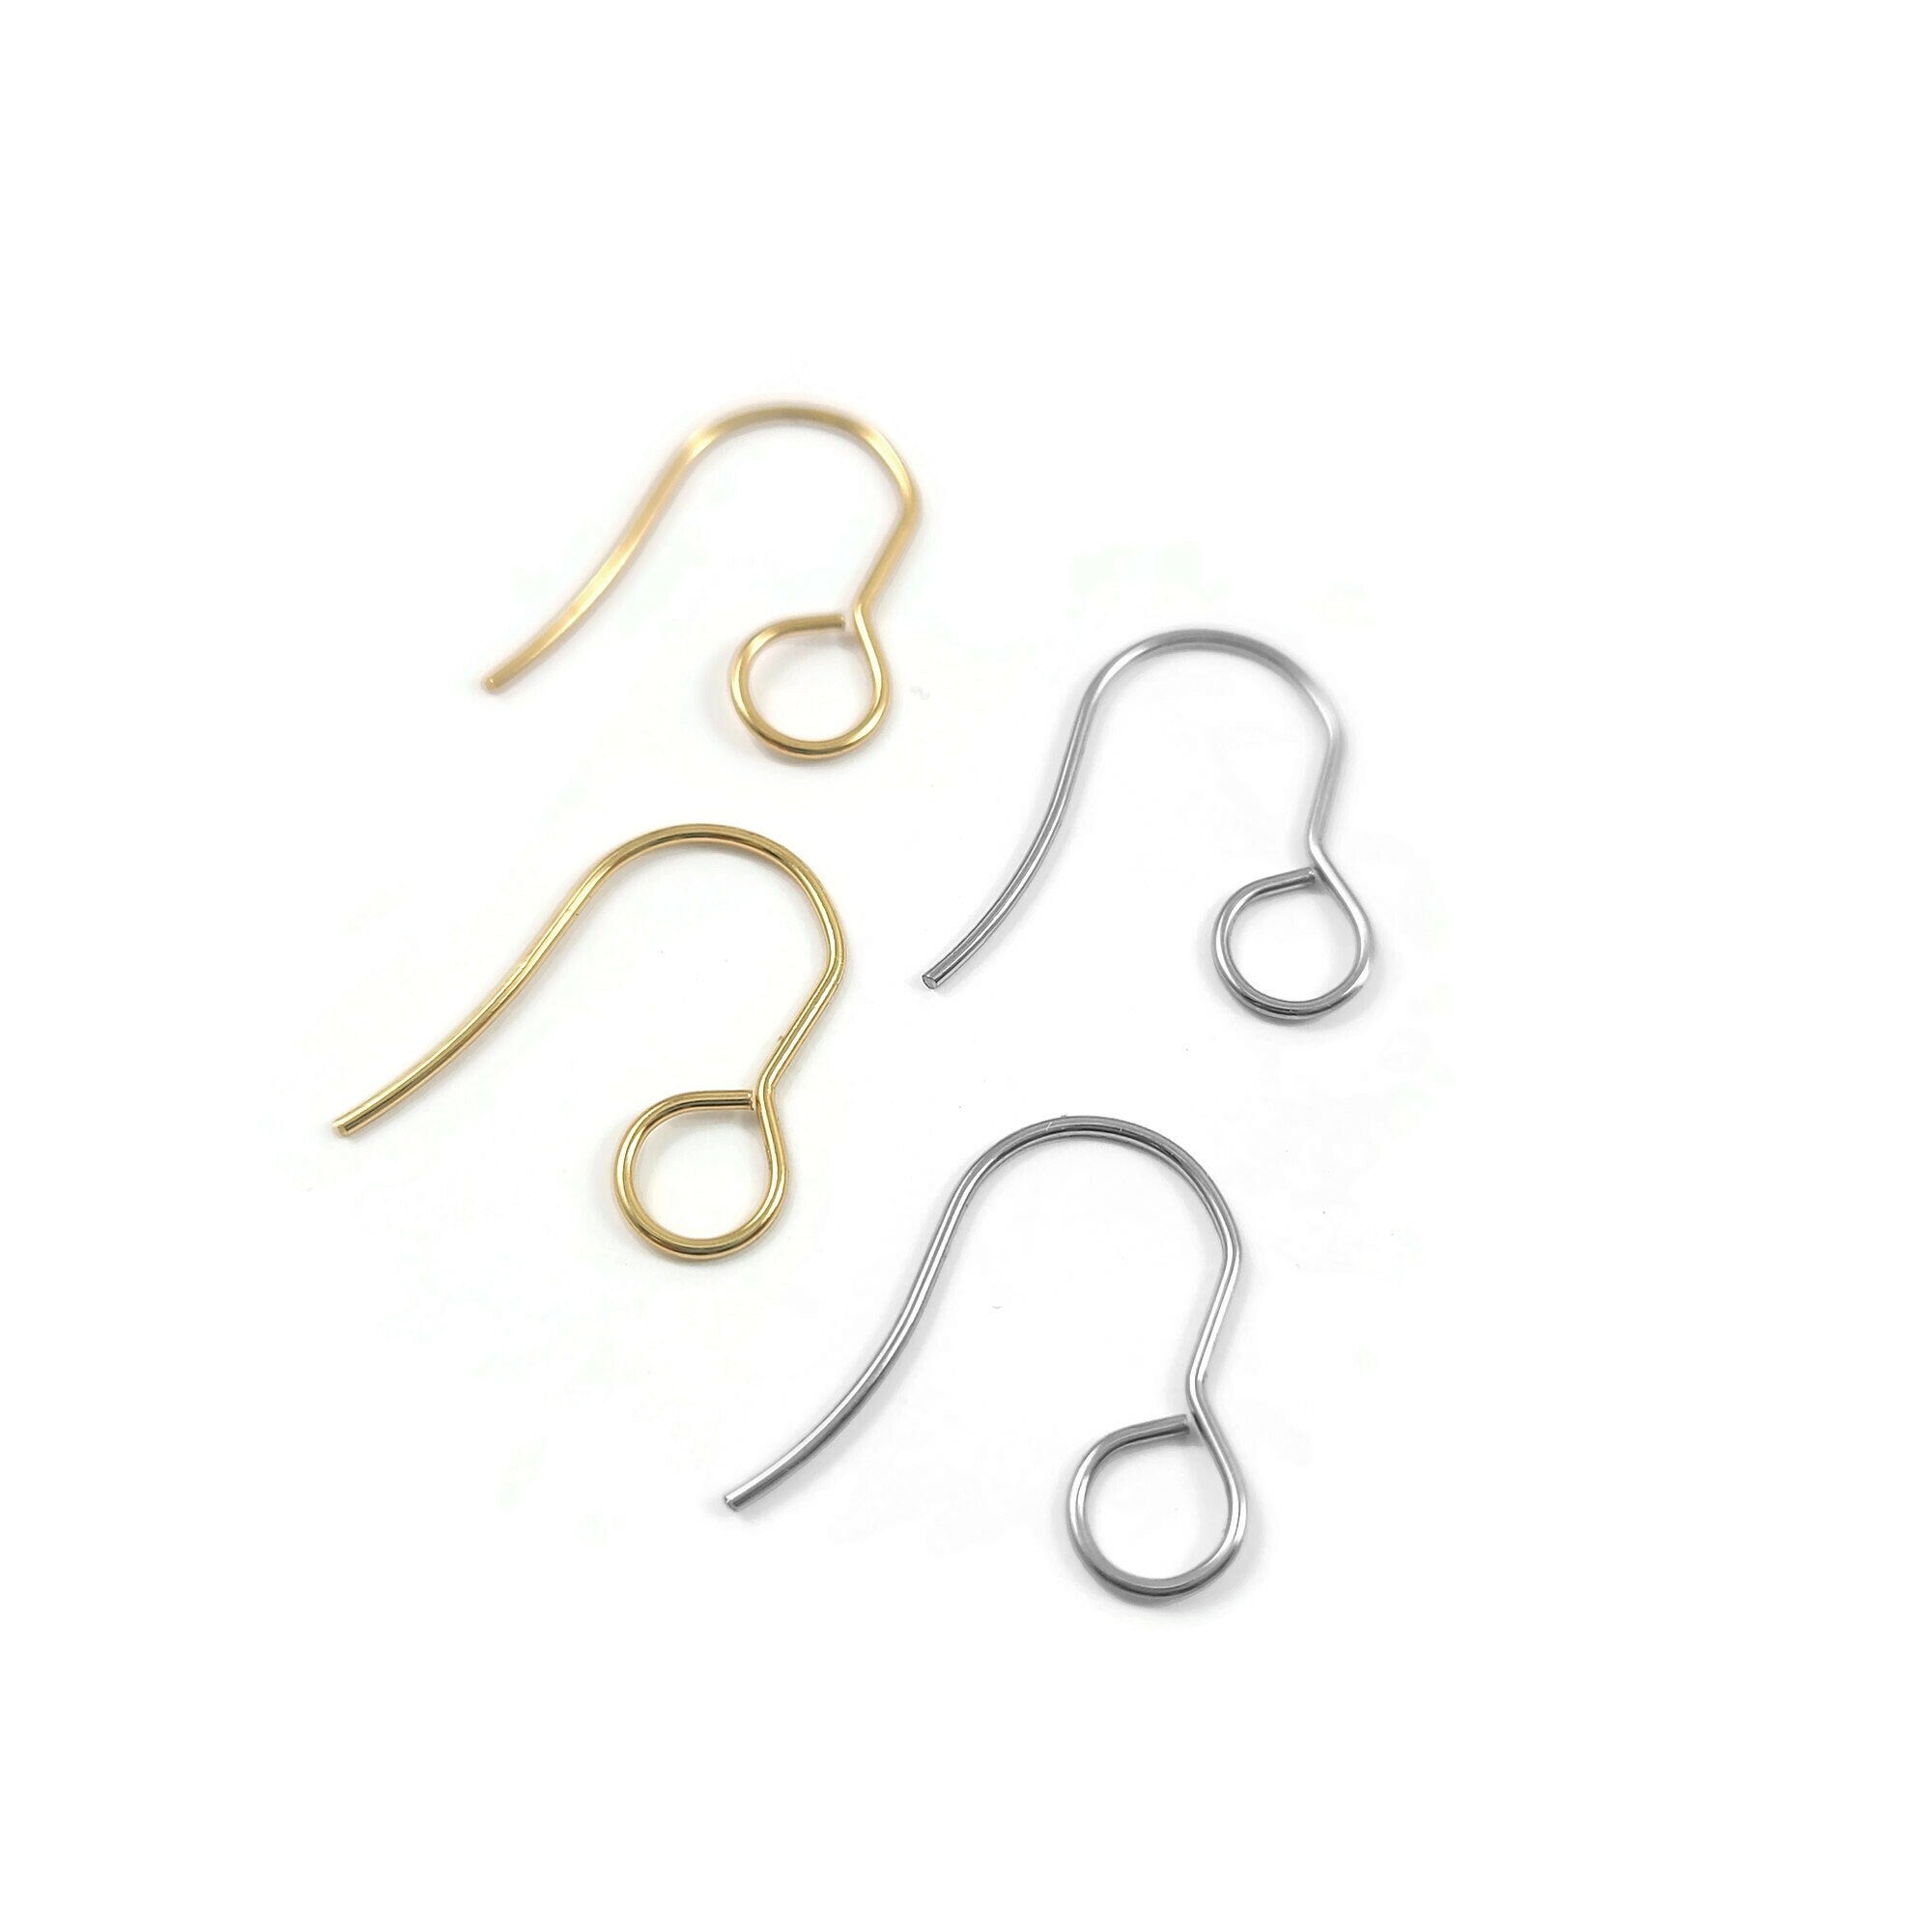 BULK PACK! Fish Hook Earwire w/ Spring & Bead, Surgical Stee